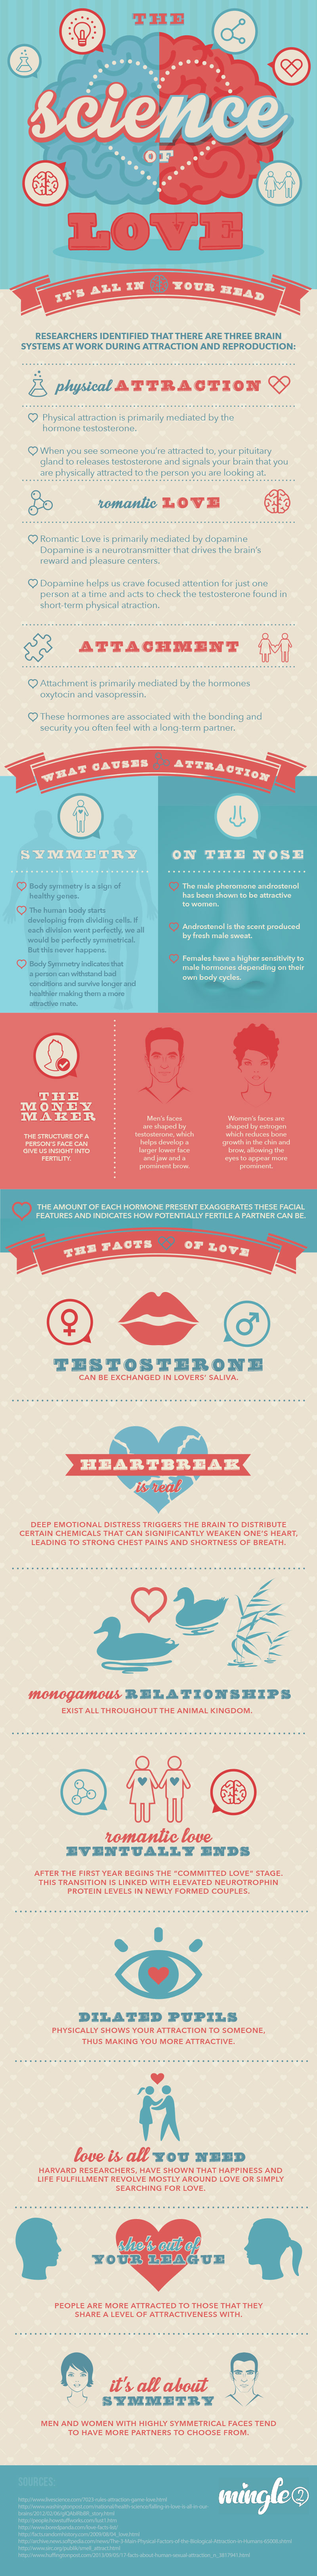 the science of love infographic 